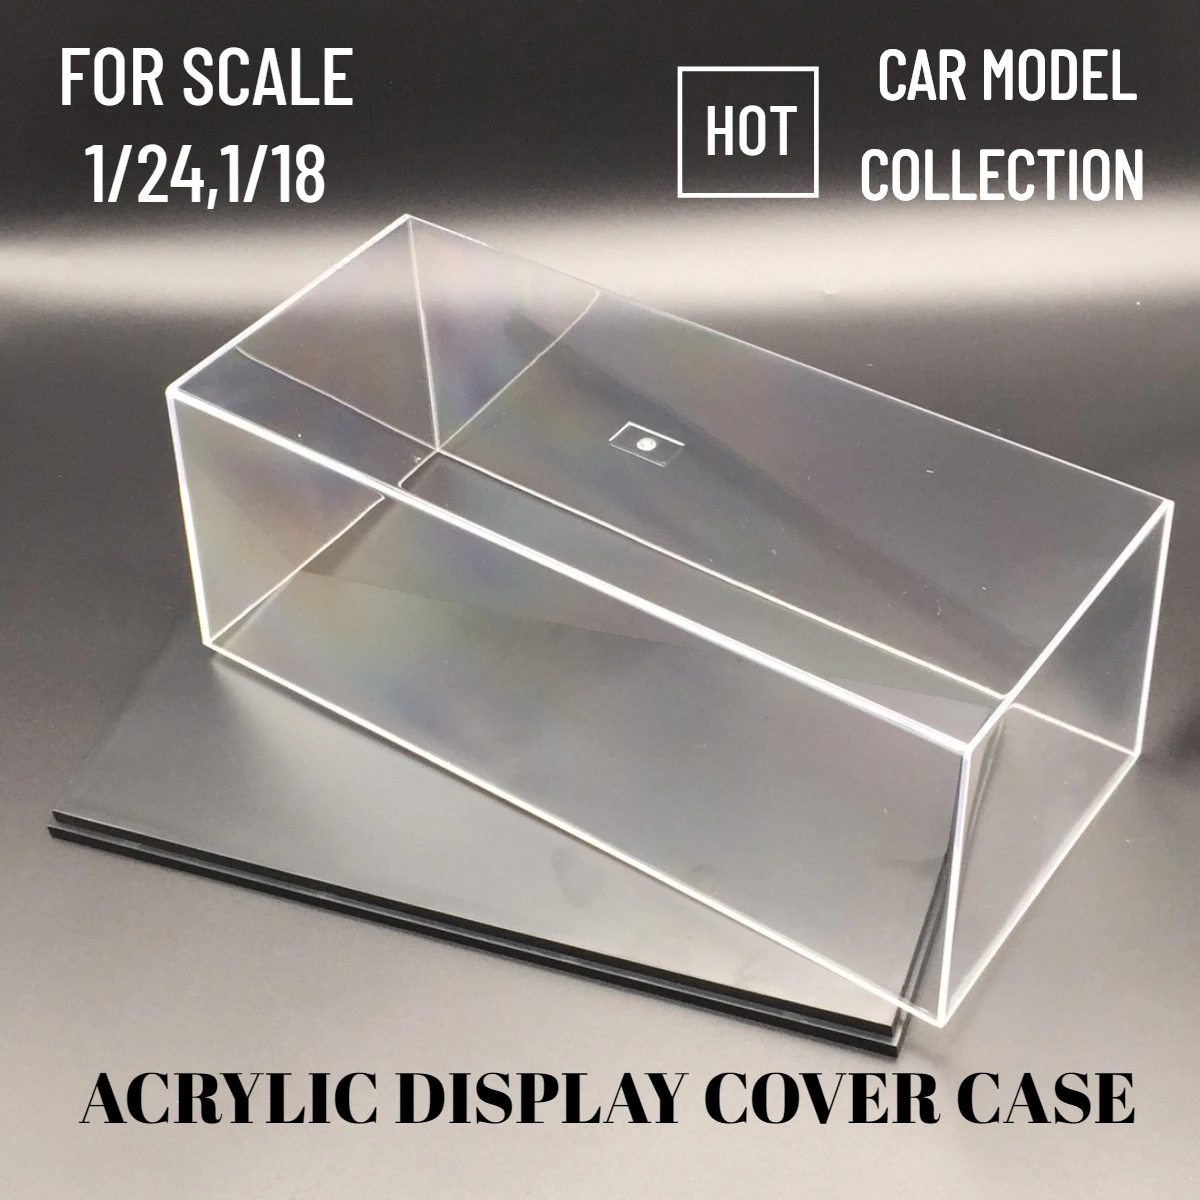 Scale 1:24 1:18 Car Model Display Case Transparent Acrylic Dust Proof Hard Cover PVC Box for Figure Collectible Miniature 1pc scale 1 43 1 64 transparent acrylic hard cover case pvc display box for car model figure collectible miniature